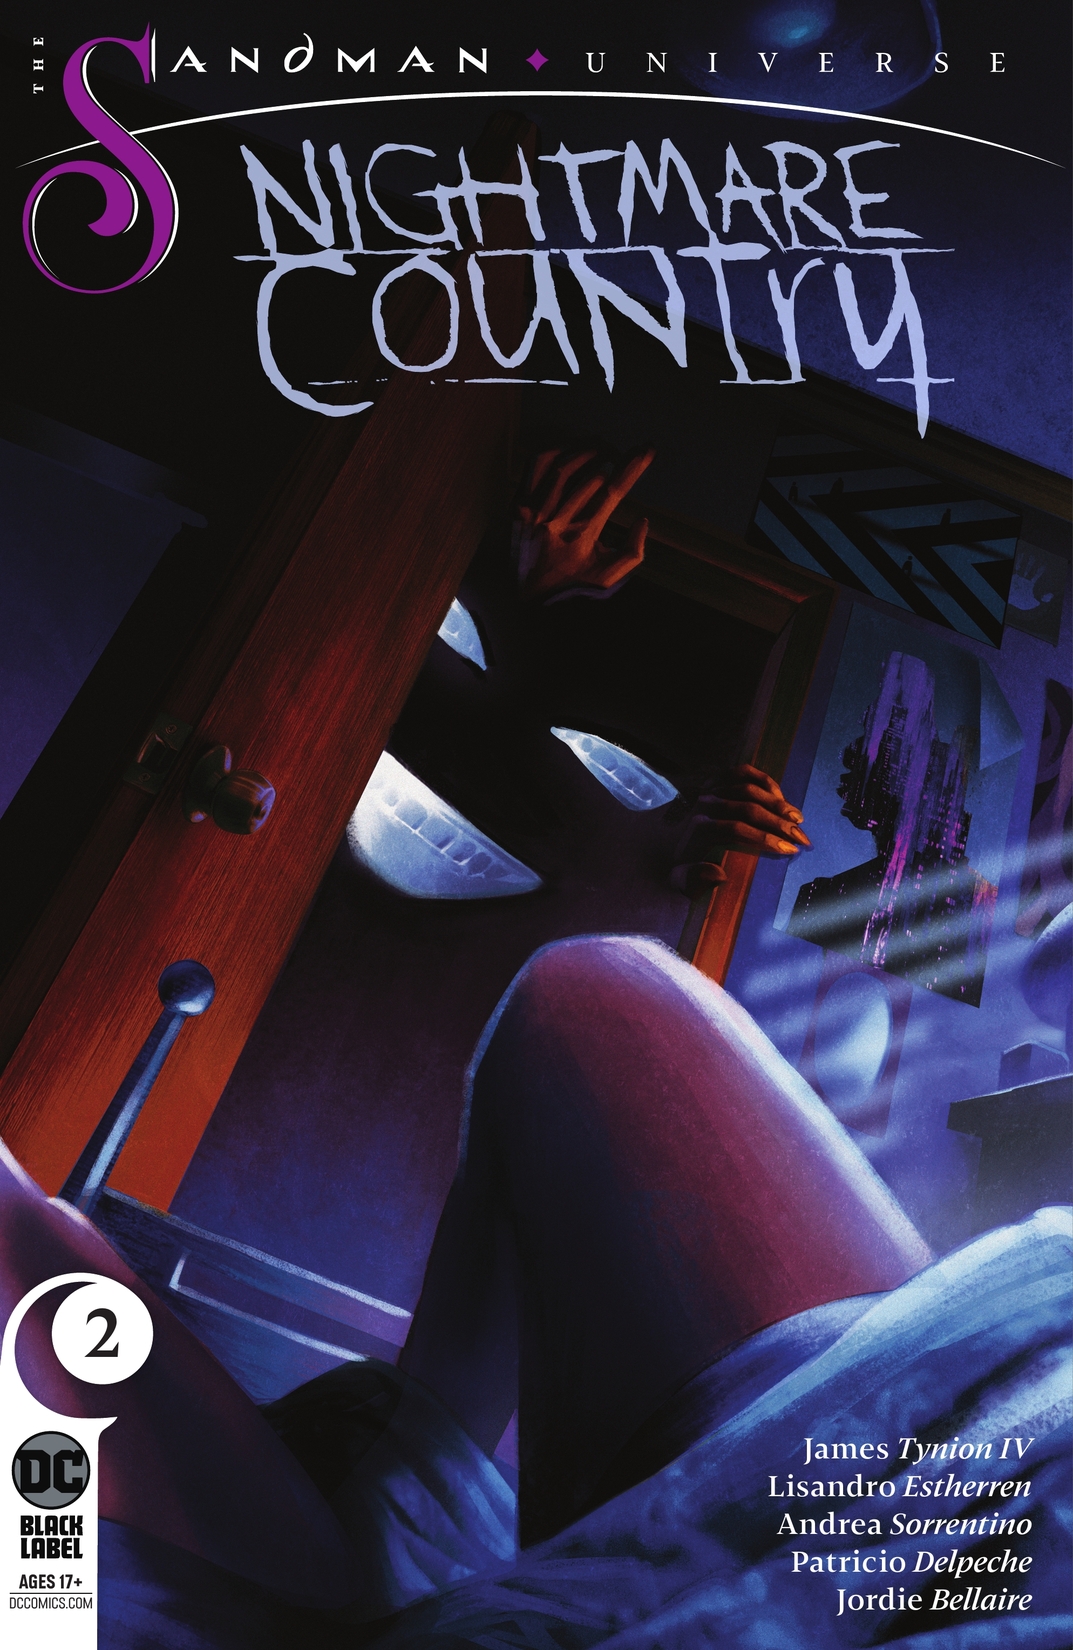 The Sandman Universe: Nightmare Country #2 preview images